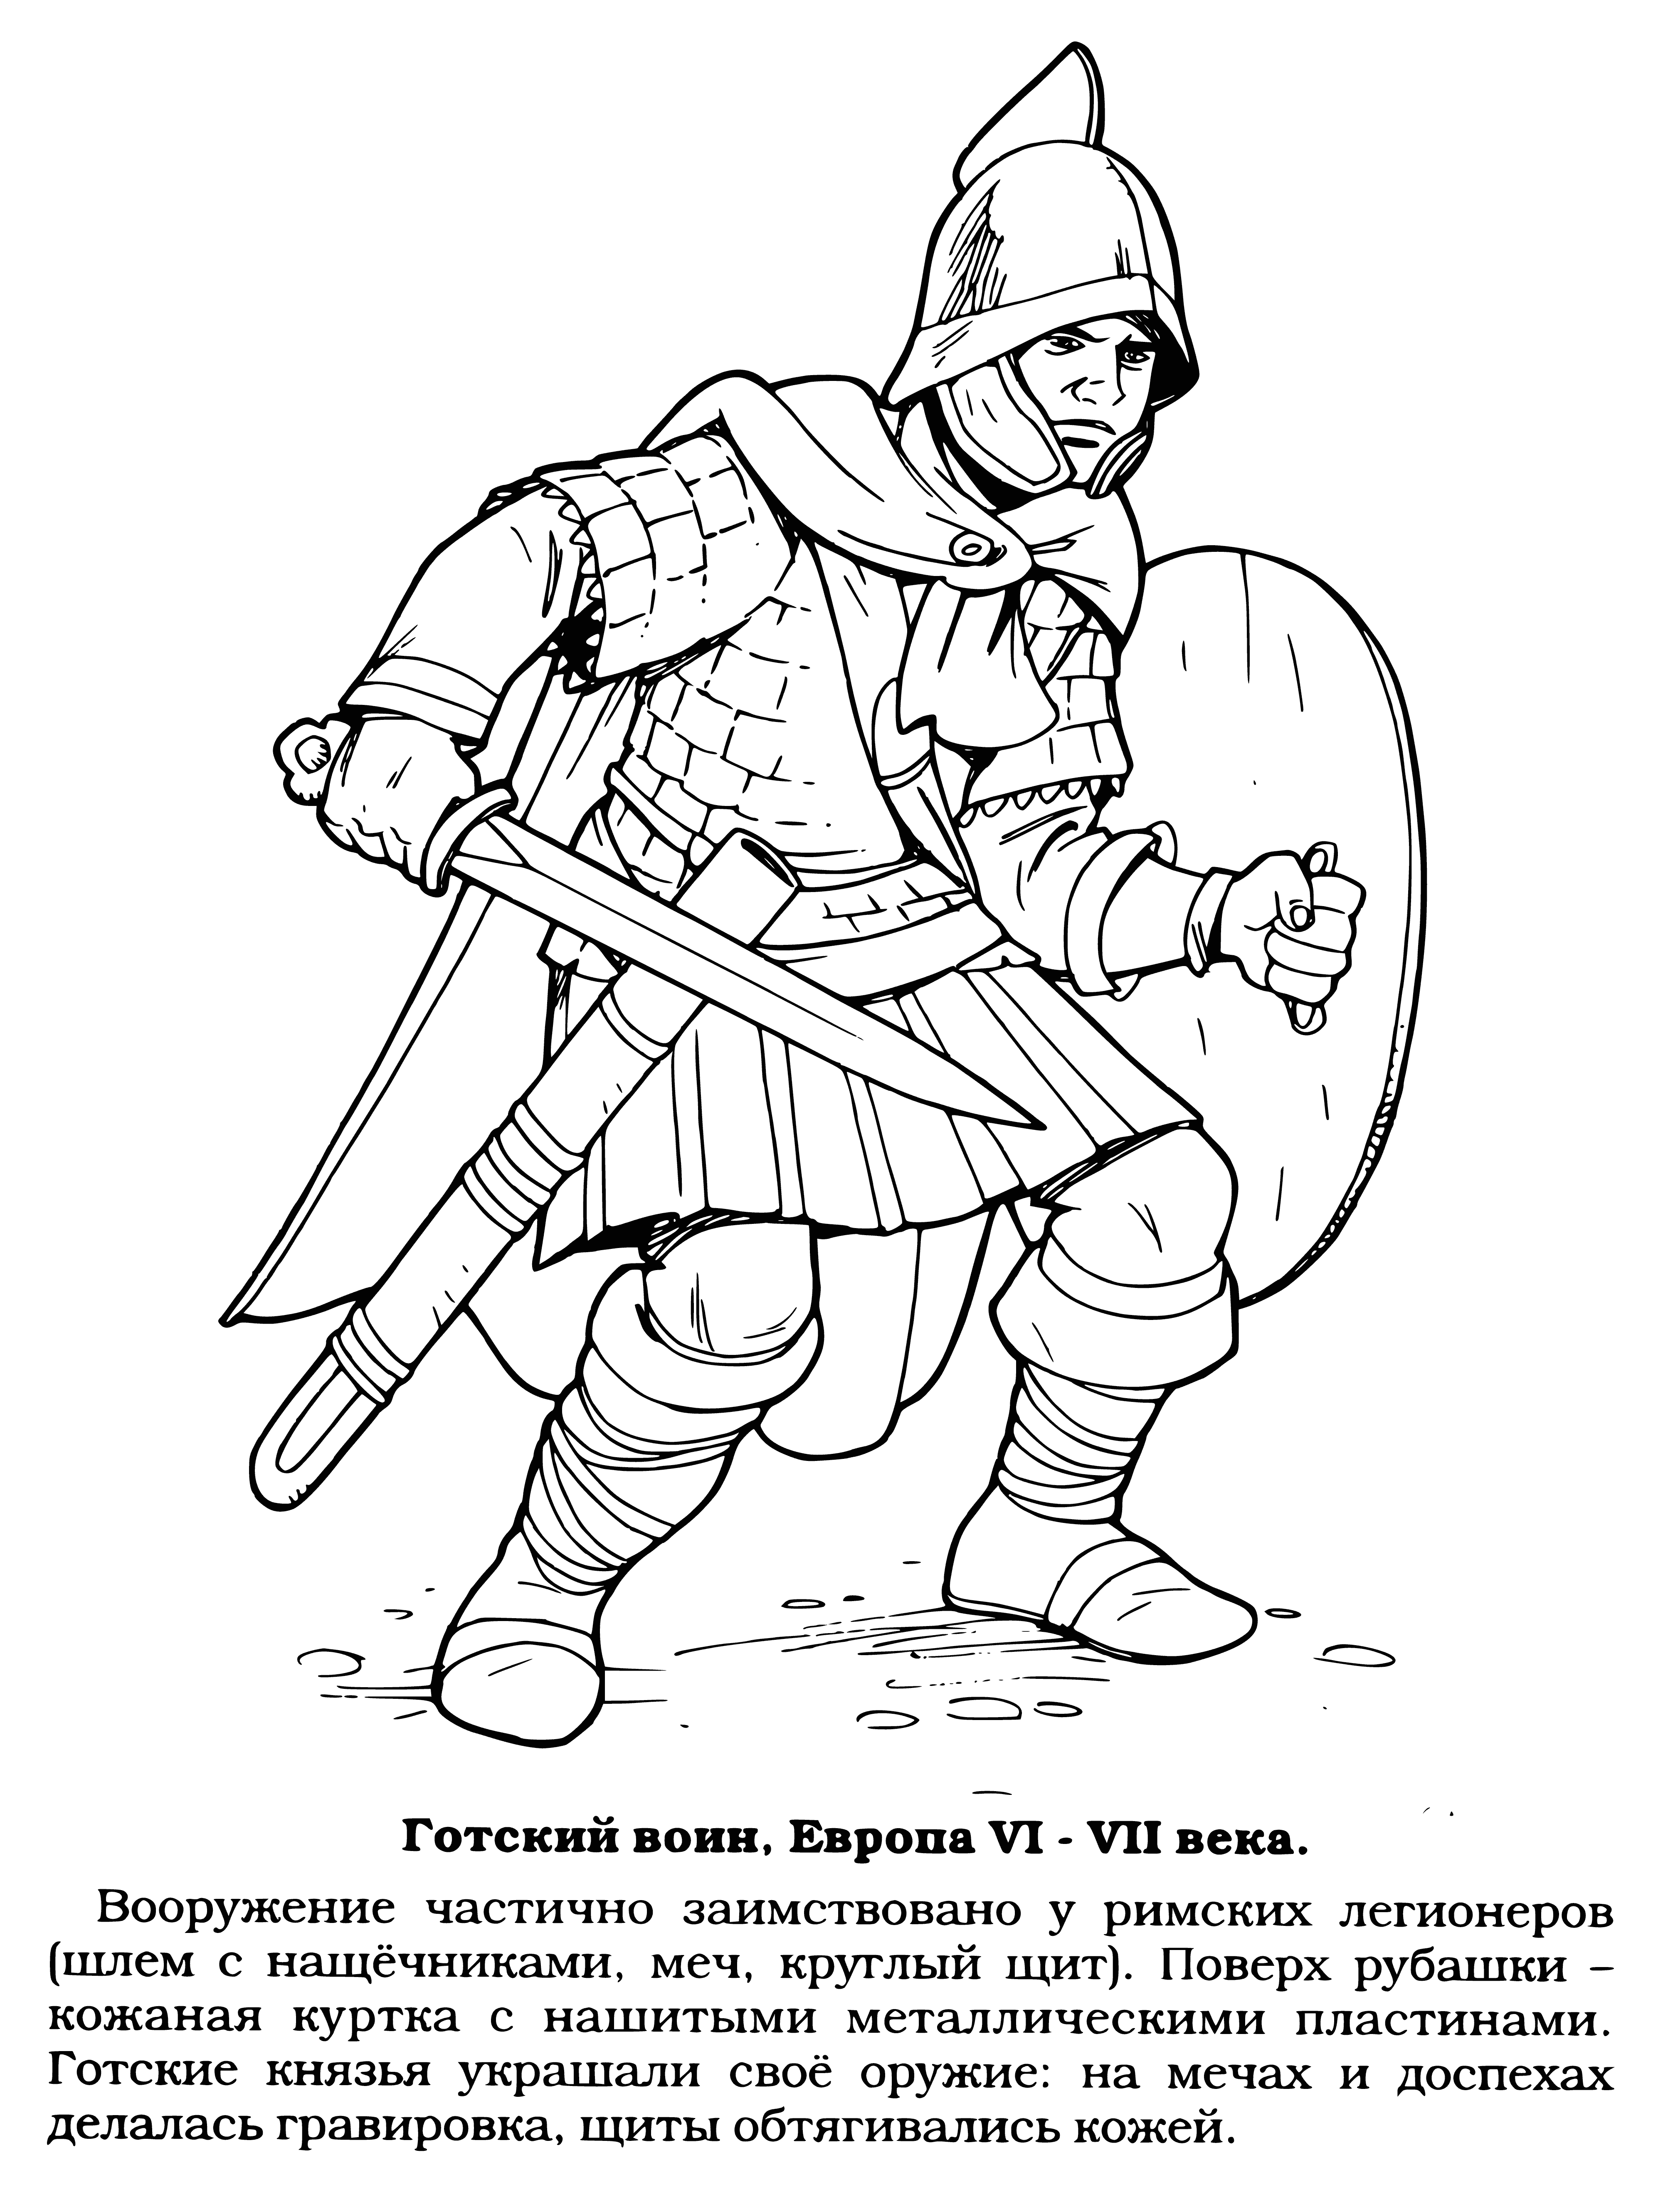 coloring page: Gothic warrior statue has a sword, shield & armor, plus a helmet w/ a plume. Stands tall on a pedestal. Symbol of strength & bravery.